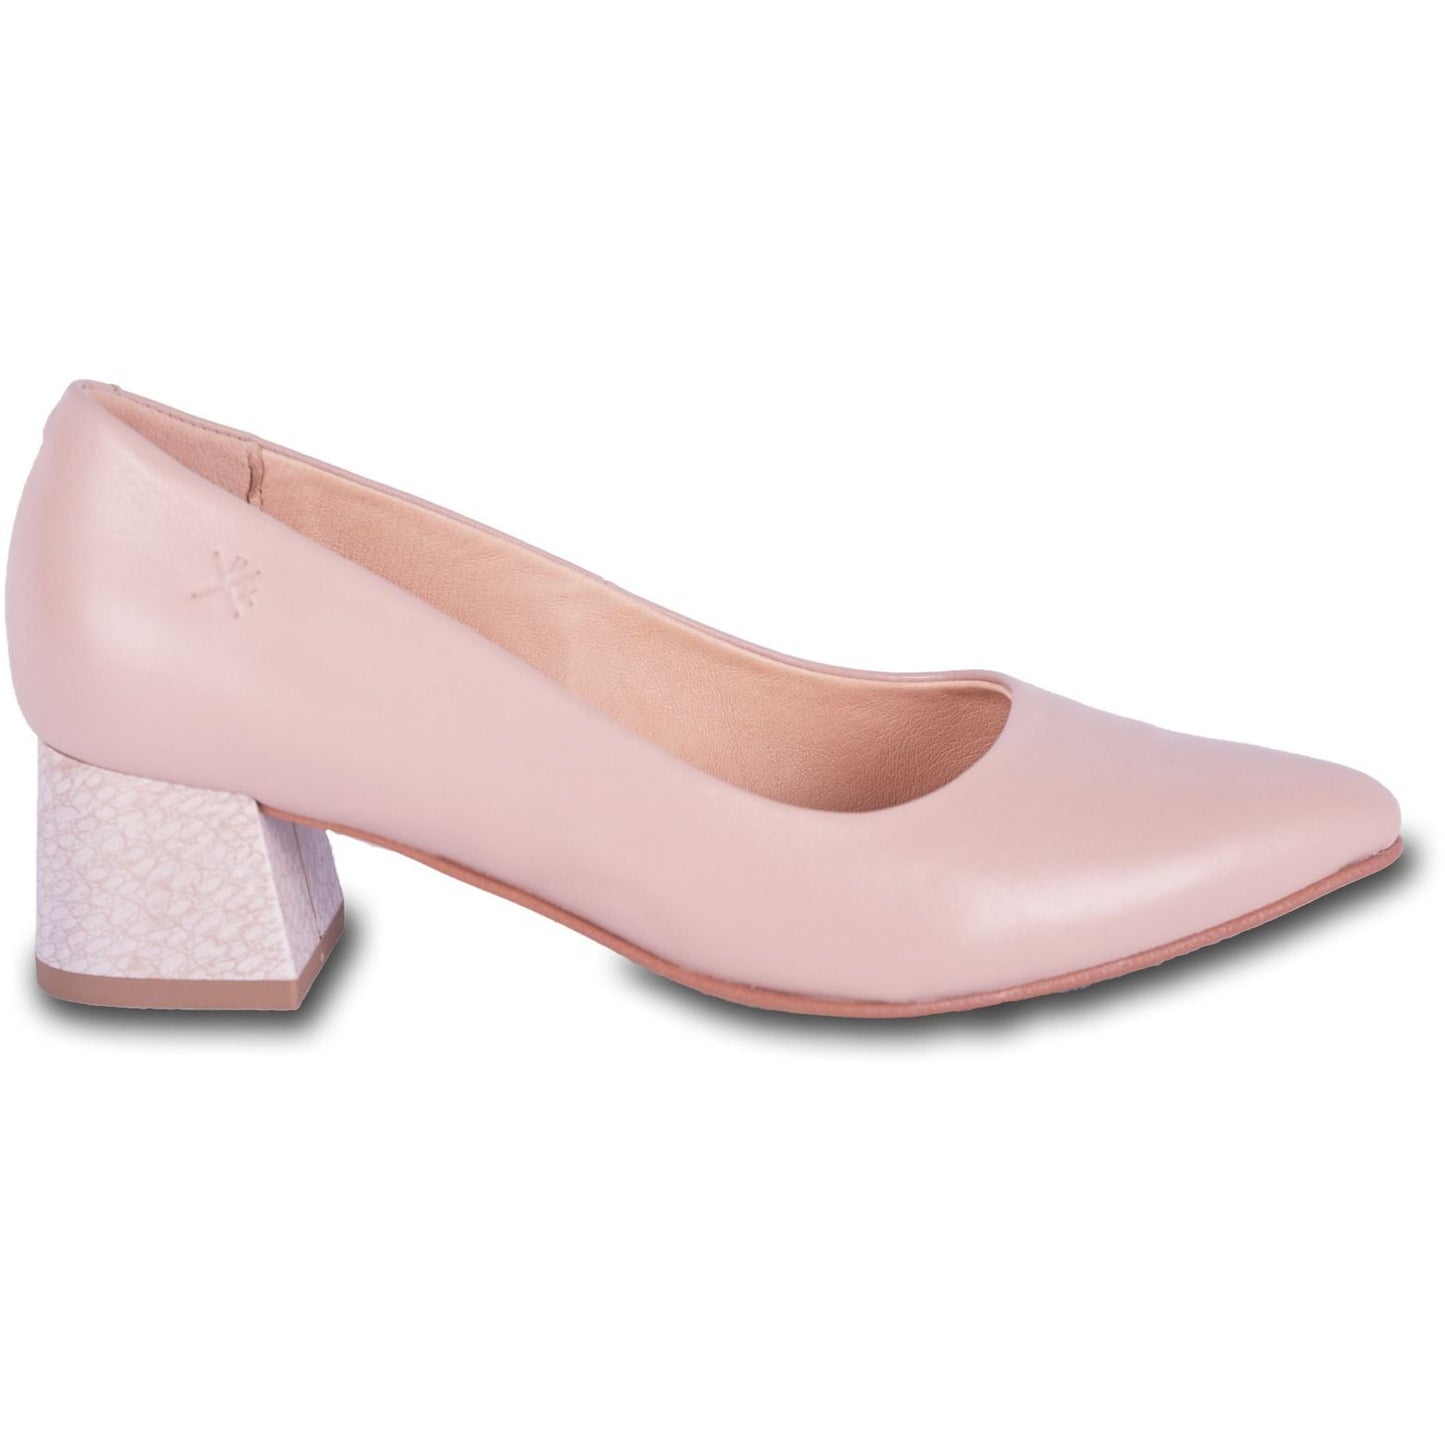 Genuine leather nude women heel pumps will give your posture an elegant look.